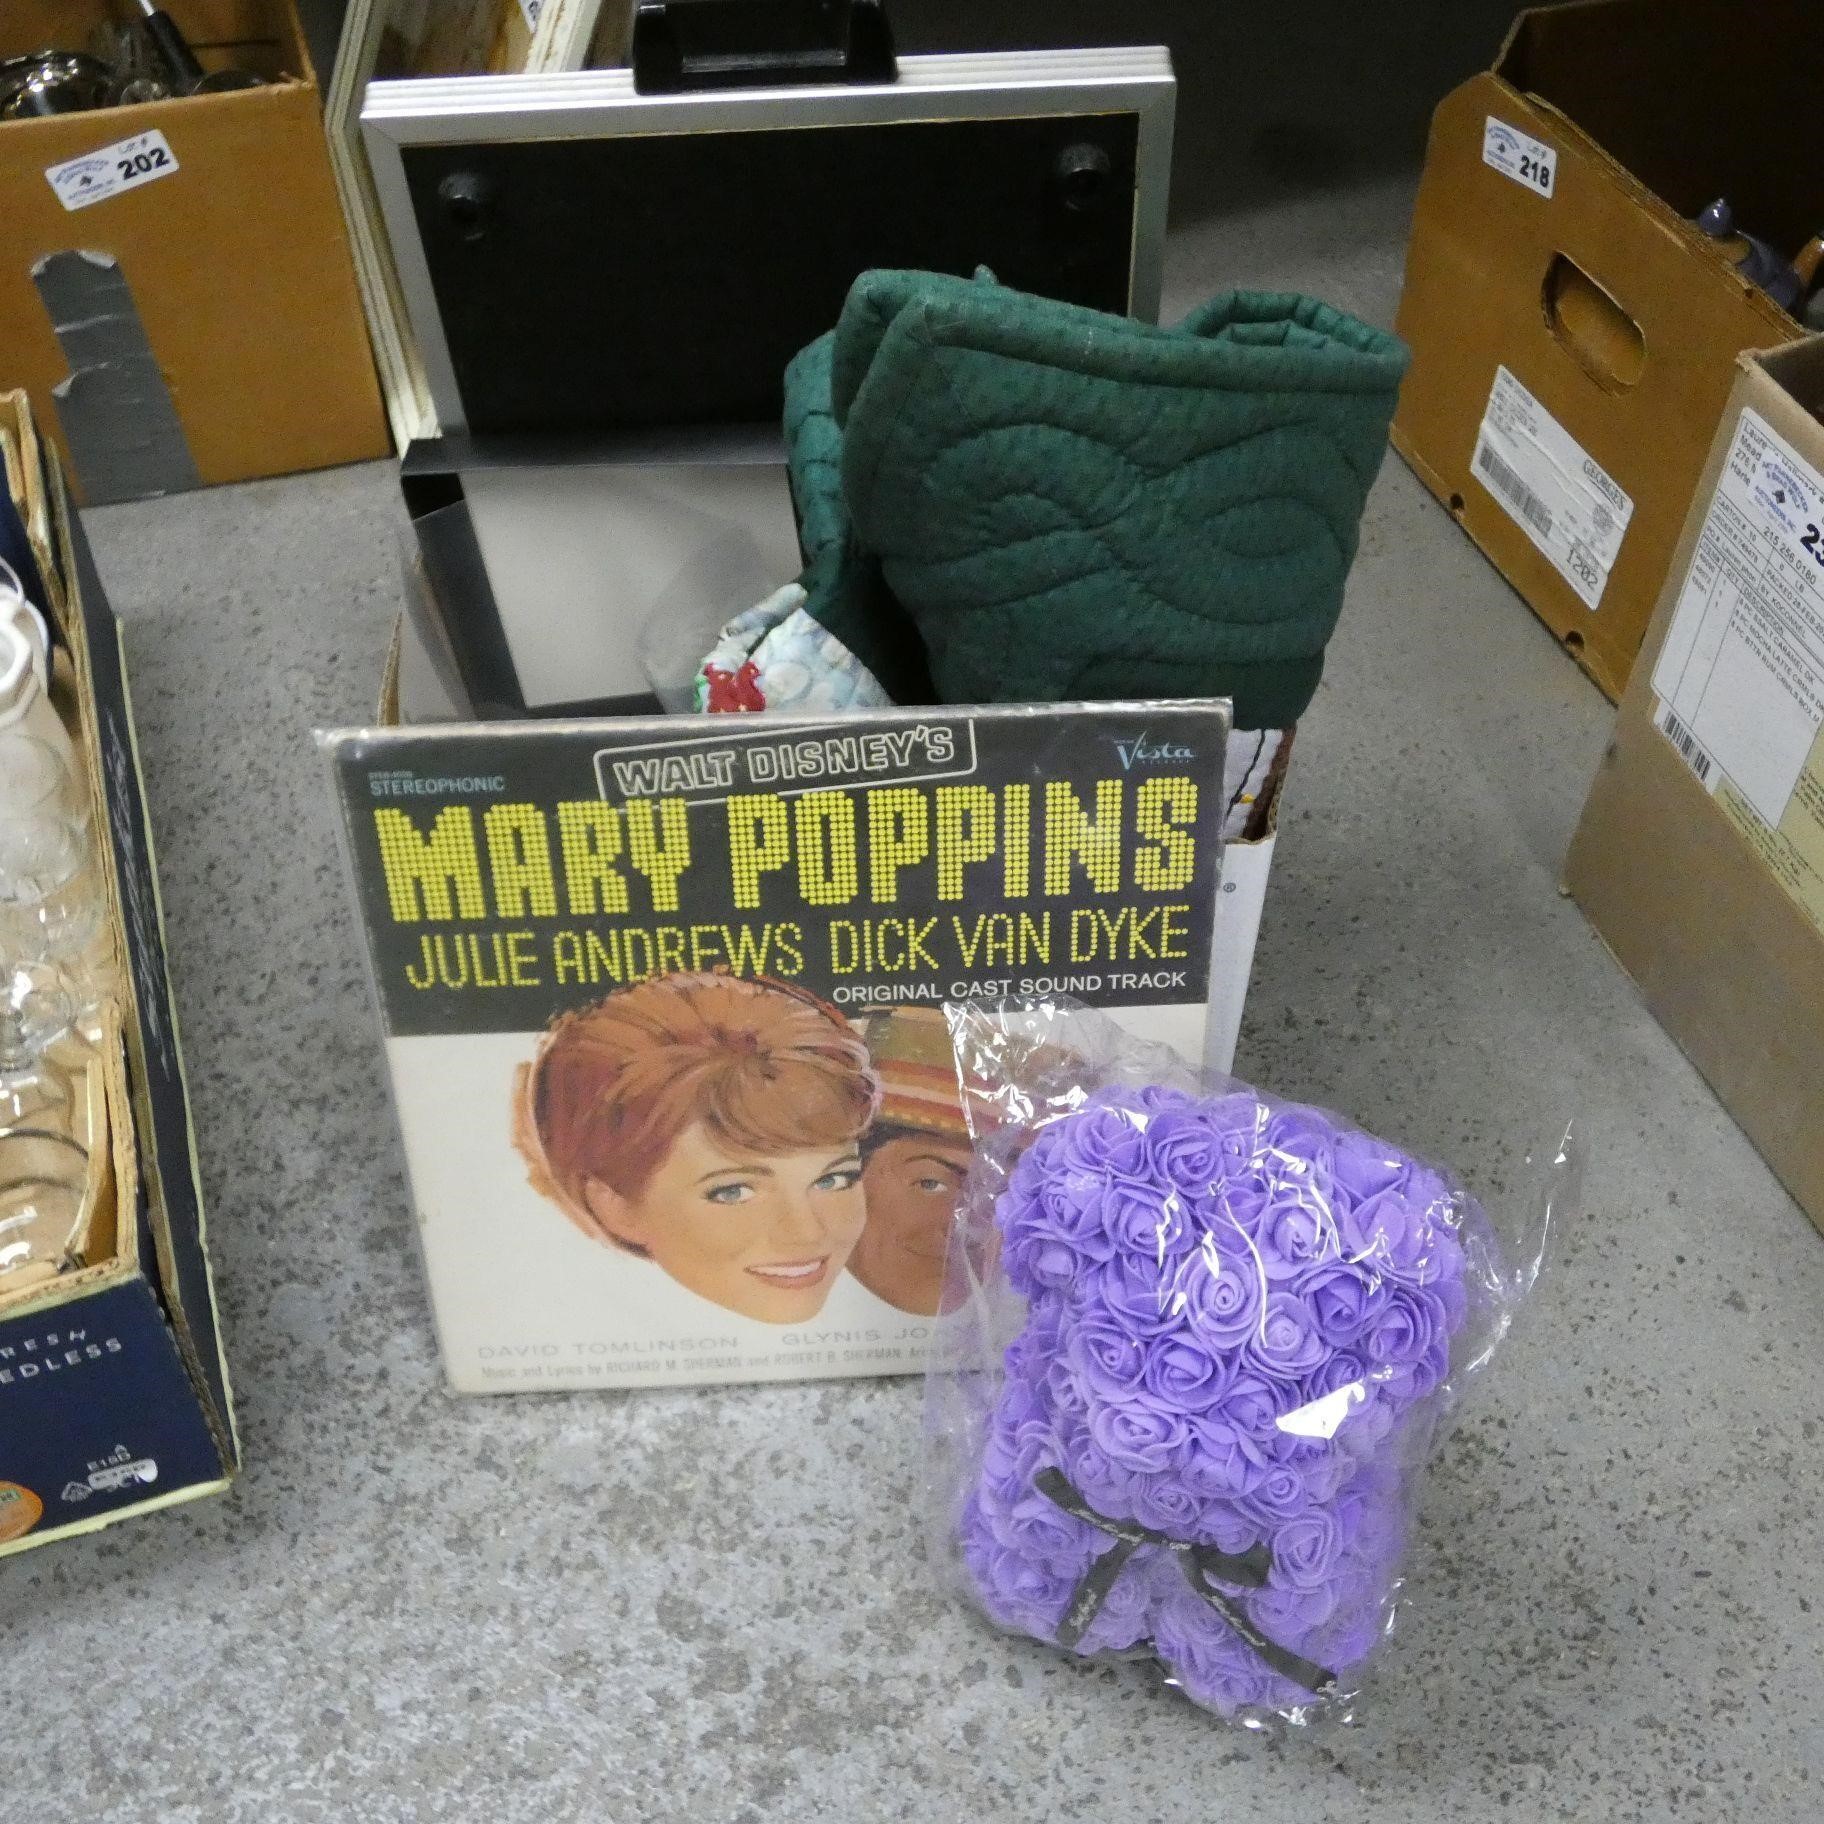 Modern Quilt, Rose Teddy Bear, Mary Poppins Record